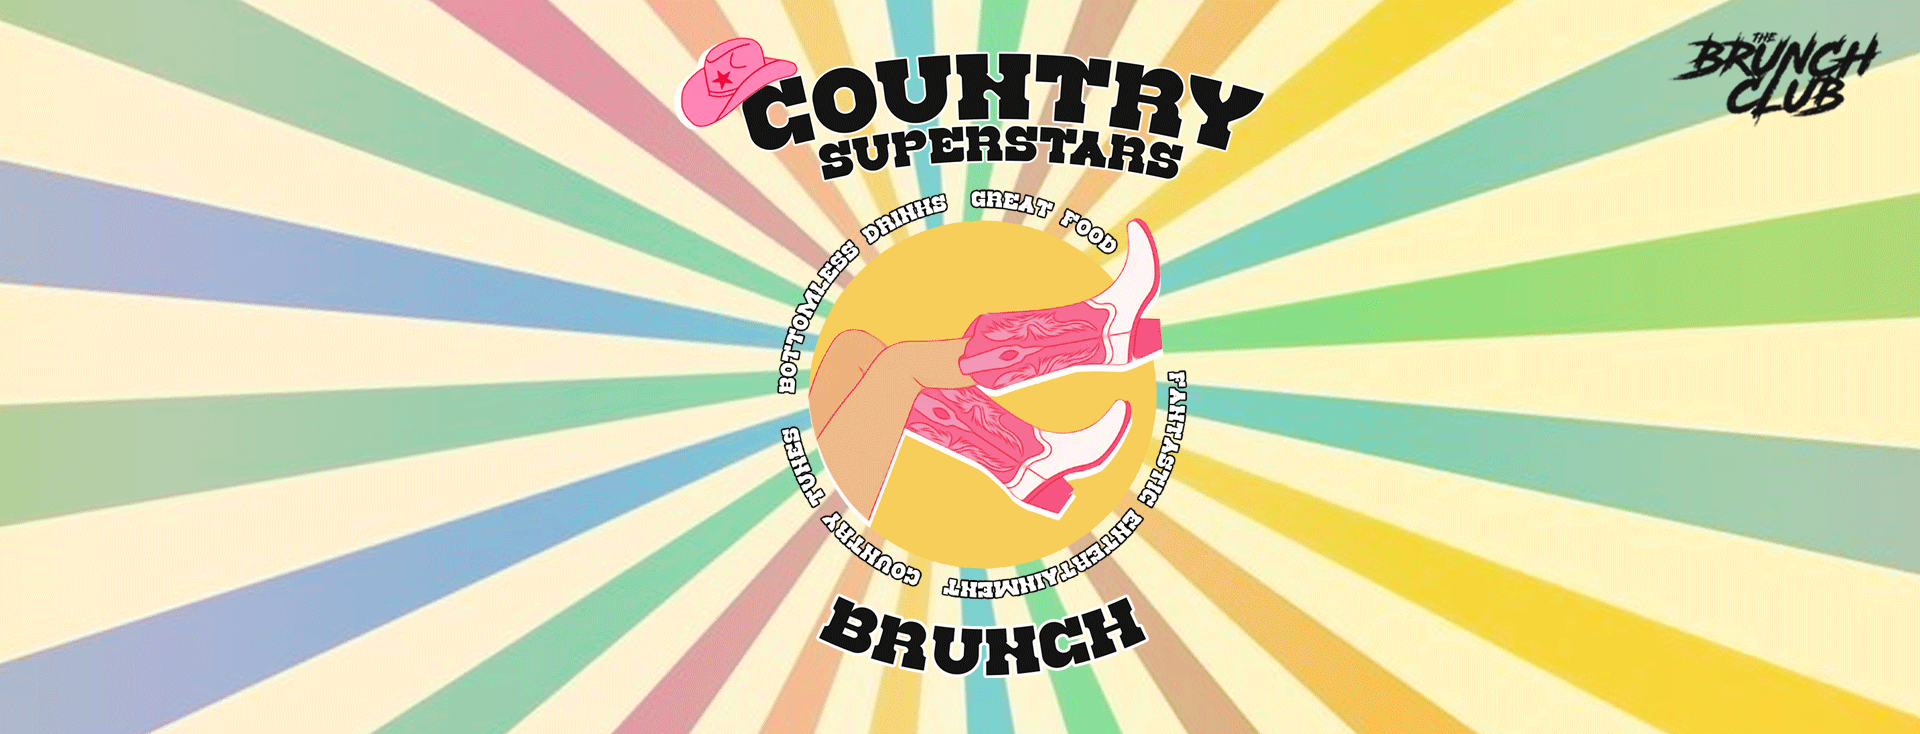 Country Superstars Bottomless Brunch - Lincoln